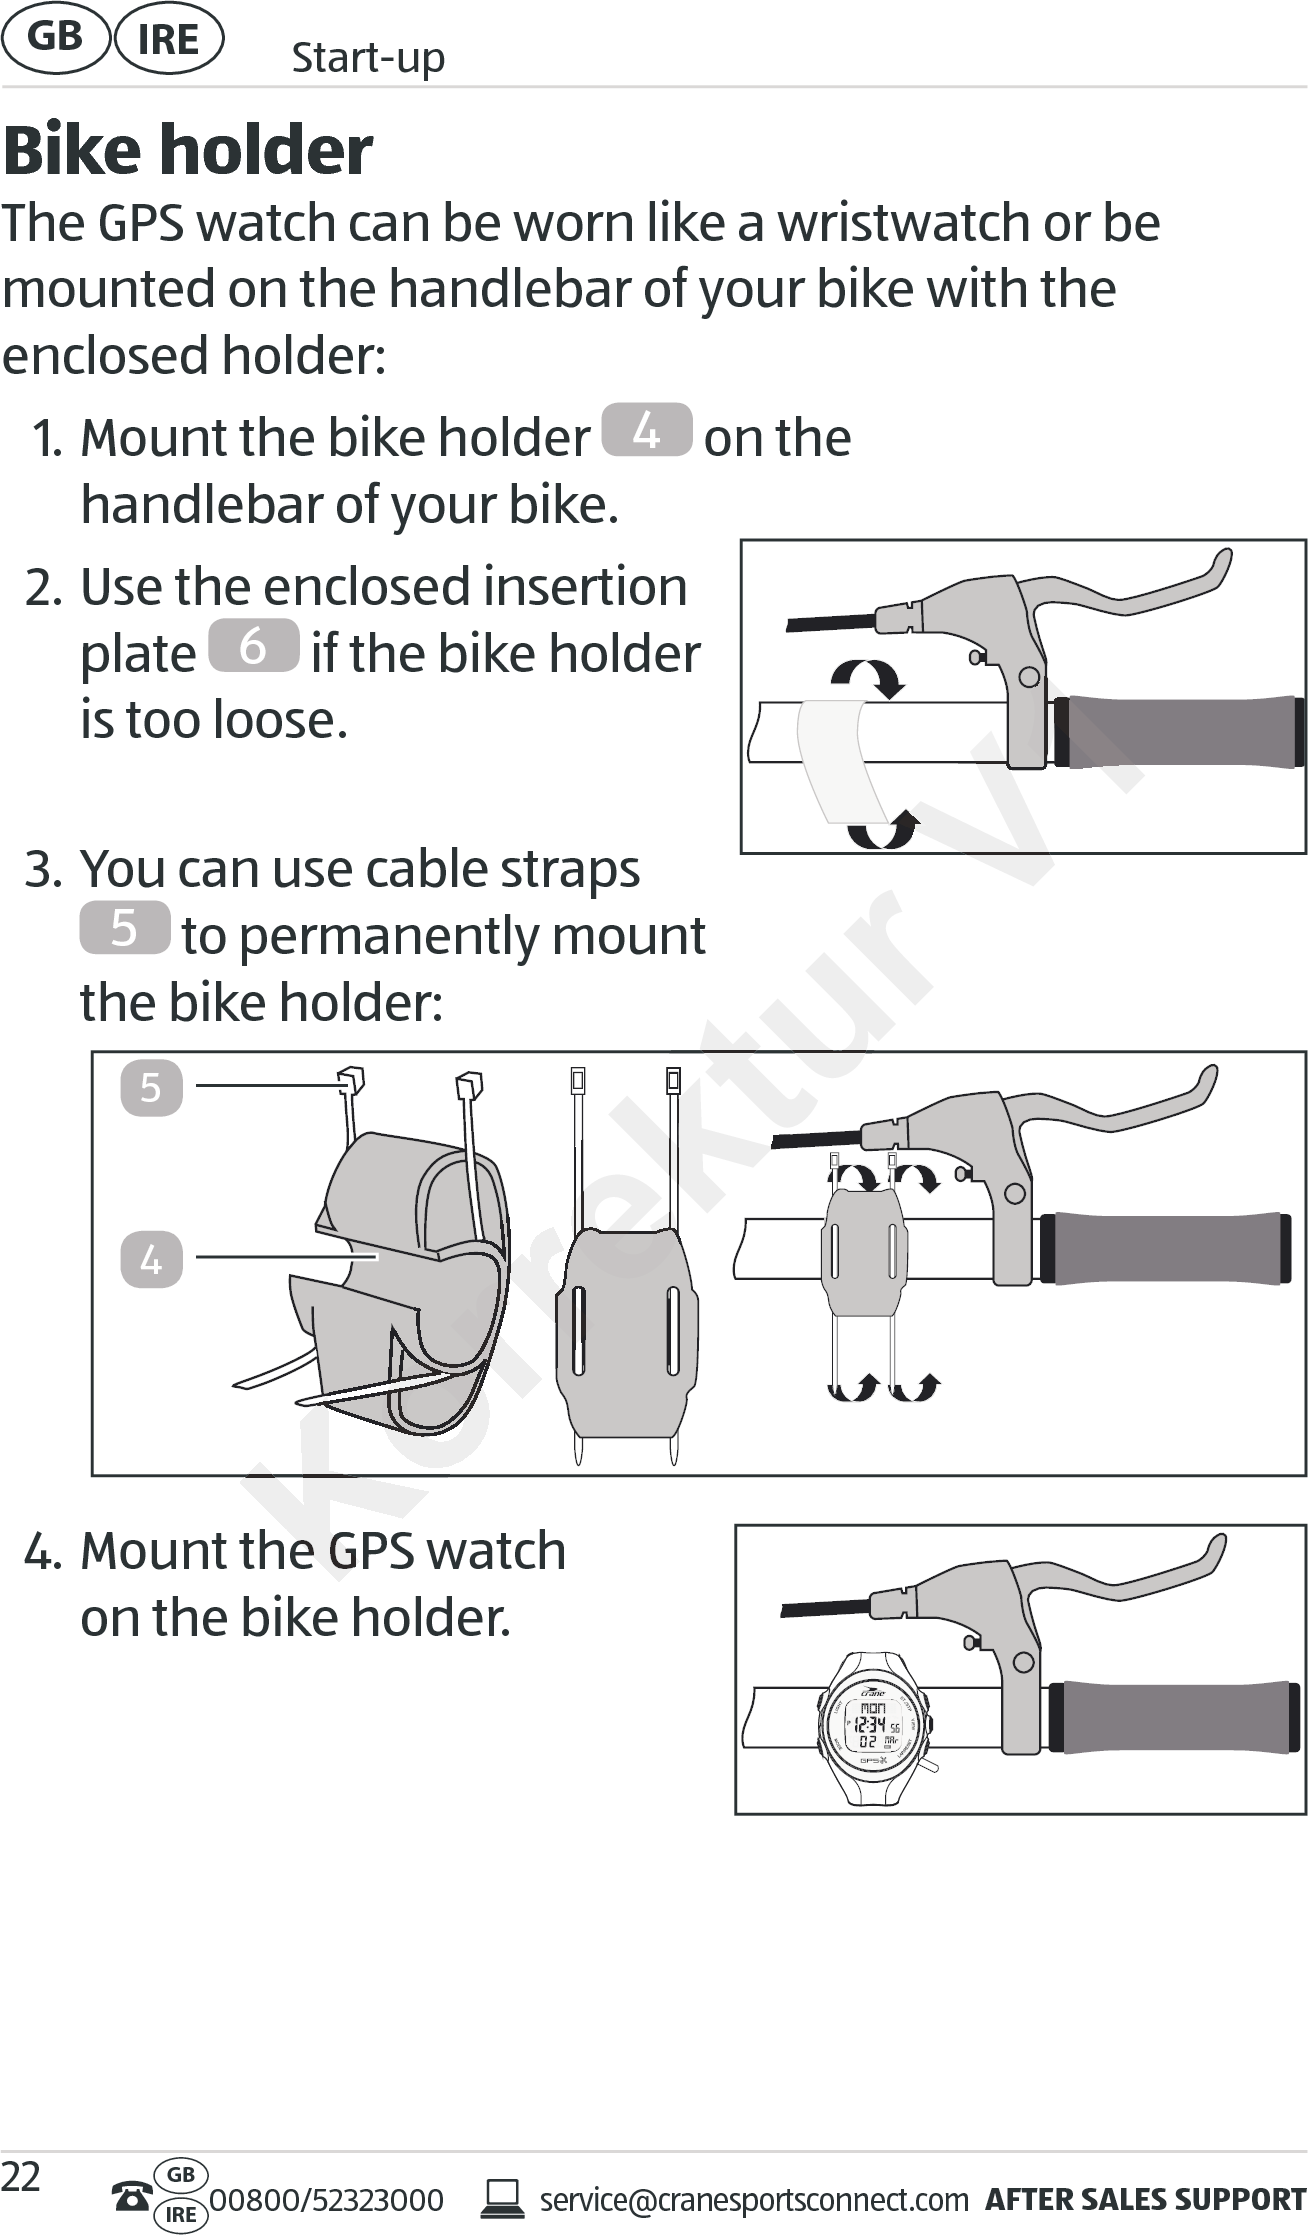 AFTER SALES SUPPORTservice@cranesportsconnect.comGBIRE 00800/52323000IRE Start-upGB 22Bike holderThe GPS watch can be worn like a wristwatch or be mounted on the handlebar of your bike with the  enclosed holder:1. Mount the bike holder  4 on the  handlebar of your bike.2. Use the enclosed insertion  plate  6 if the bike holder is too loose. 3. You can use cable straps 5 to permanently mount  the bike holder: 4. Mount the GPS watch  on the bike holder.45Mount the GPS watchMount the GPS watchKorrektur Korrektur Korrektur Korrektur Korrektur Korrektur Korrektur Korrektur Korrektur Korrektur Korrektur Korrektur Korrektur Korrektur Korrektur Korrektur Korrektur Korrektur Korrektur Korrektur Korrektur Korrektur Korrektur Korrektur Korrektur Korrektur V1V1V1V1V1V1V1V1V1V1V1